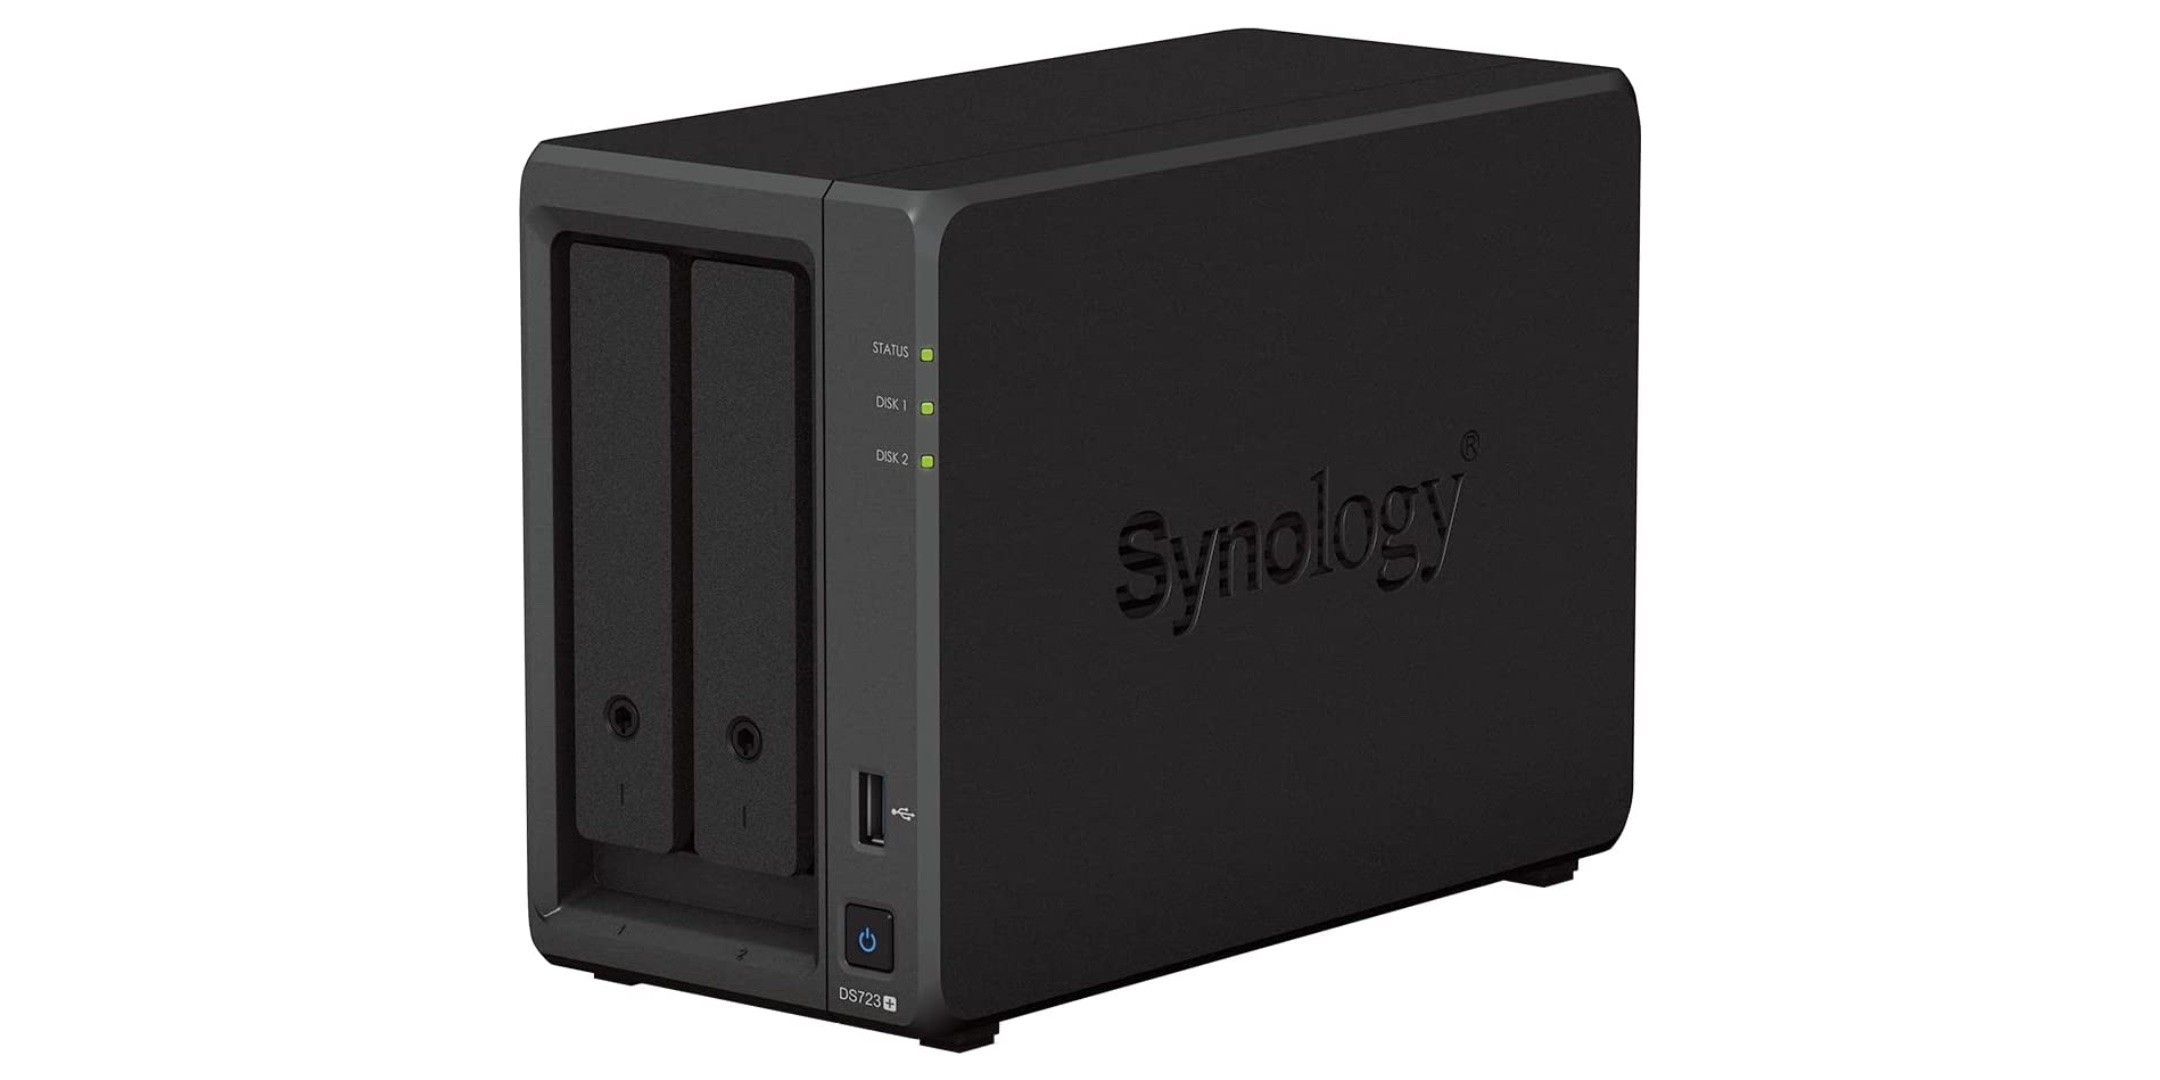 Synology DS723+ NAS 2 Bay NAS Network for Cloud Storage with Intel